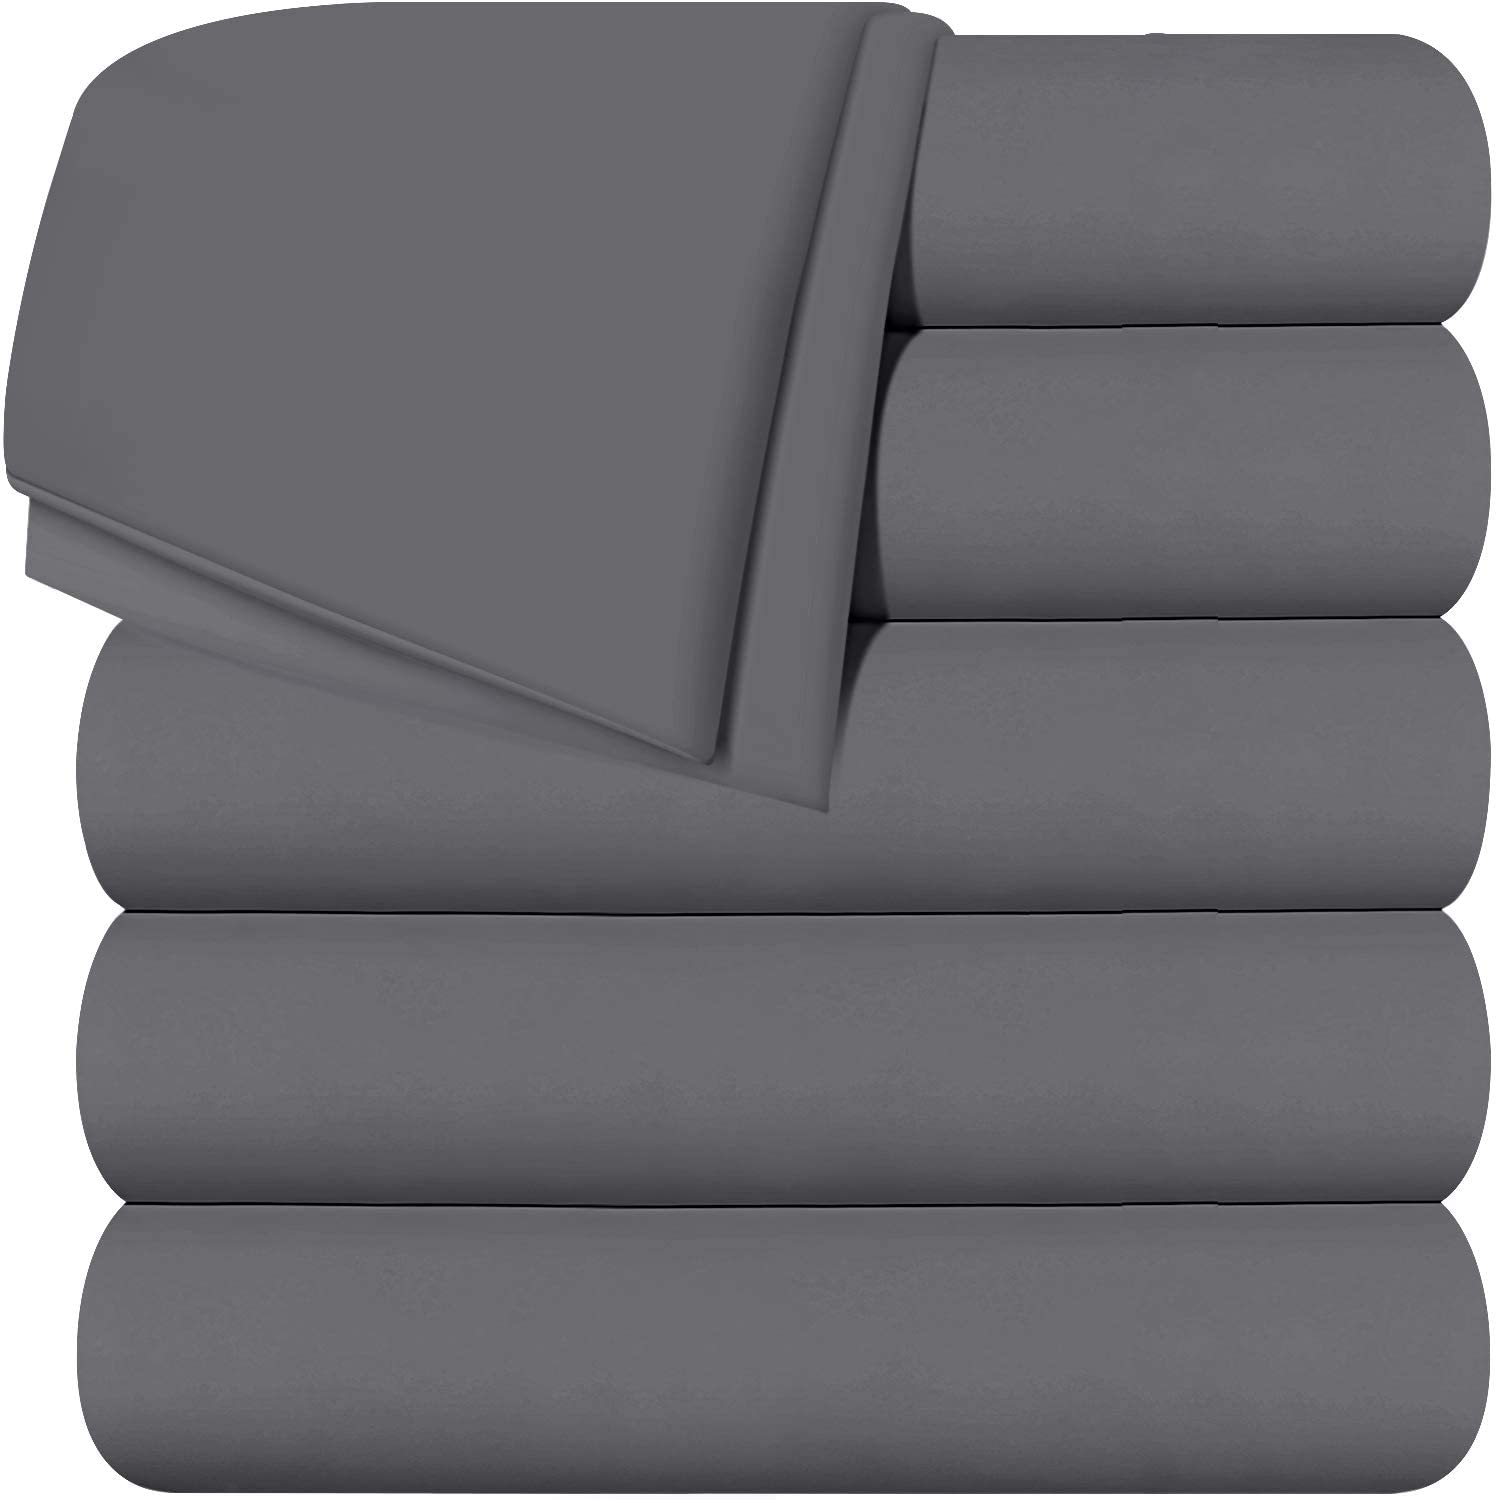 COSMOPLUS Fitted Sheet Queen Fitted Sheet Only（No Flat Sheet or